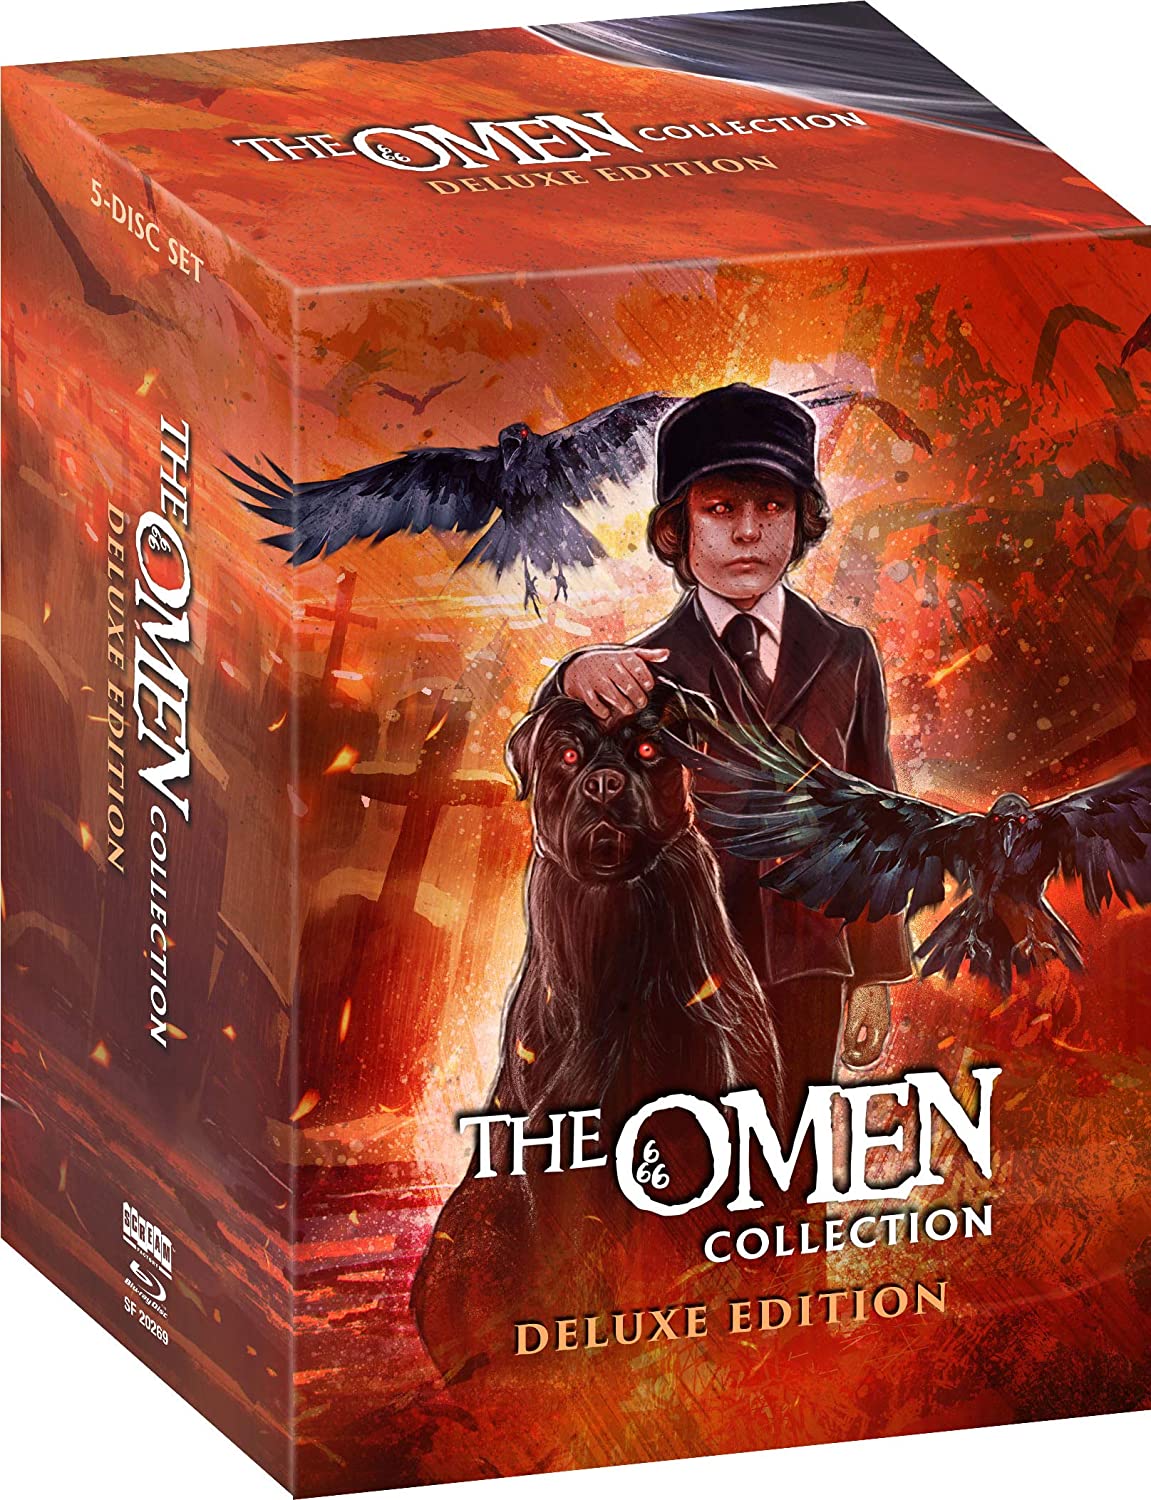 Shout! Factory Blu-ray: The Omen Collection: Deluxe Edition $24.58 @ Amazon & Walmart